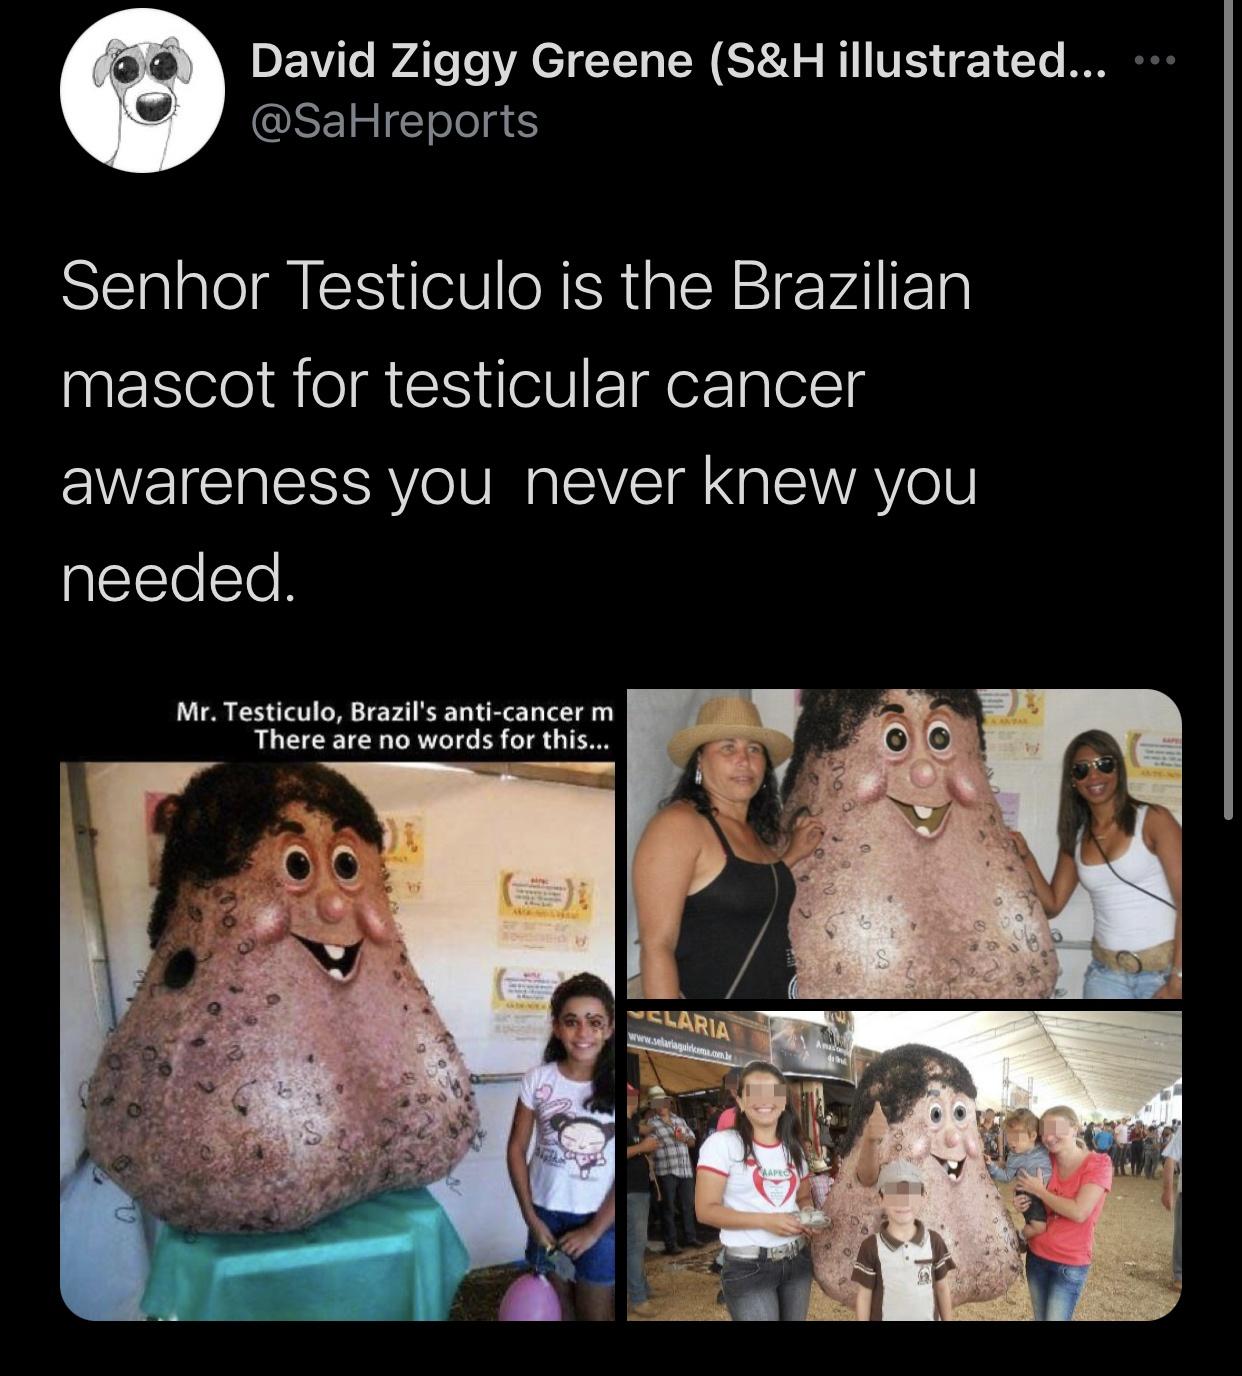 head - David Ziggy Greene S&H illustrated... Senhor Testiculo is the Brazilian mascot for testicular cancer awareness you never knew you needed. Mr. Testiculo, Brazil's anticancer m There are no words for this... Slaria Chaped